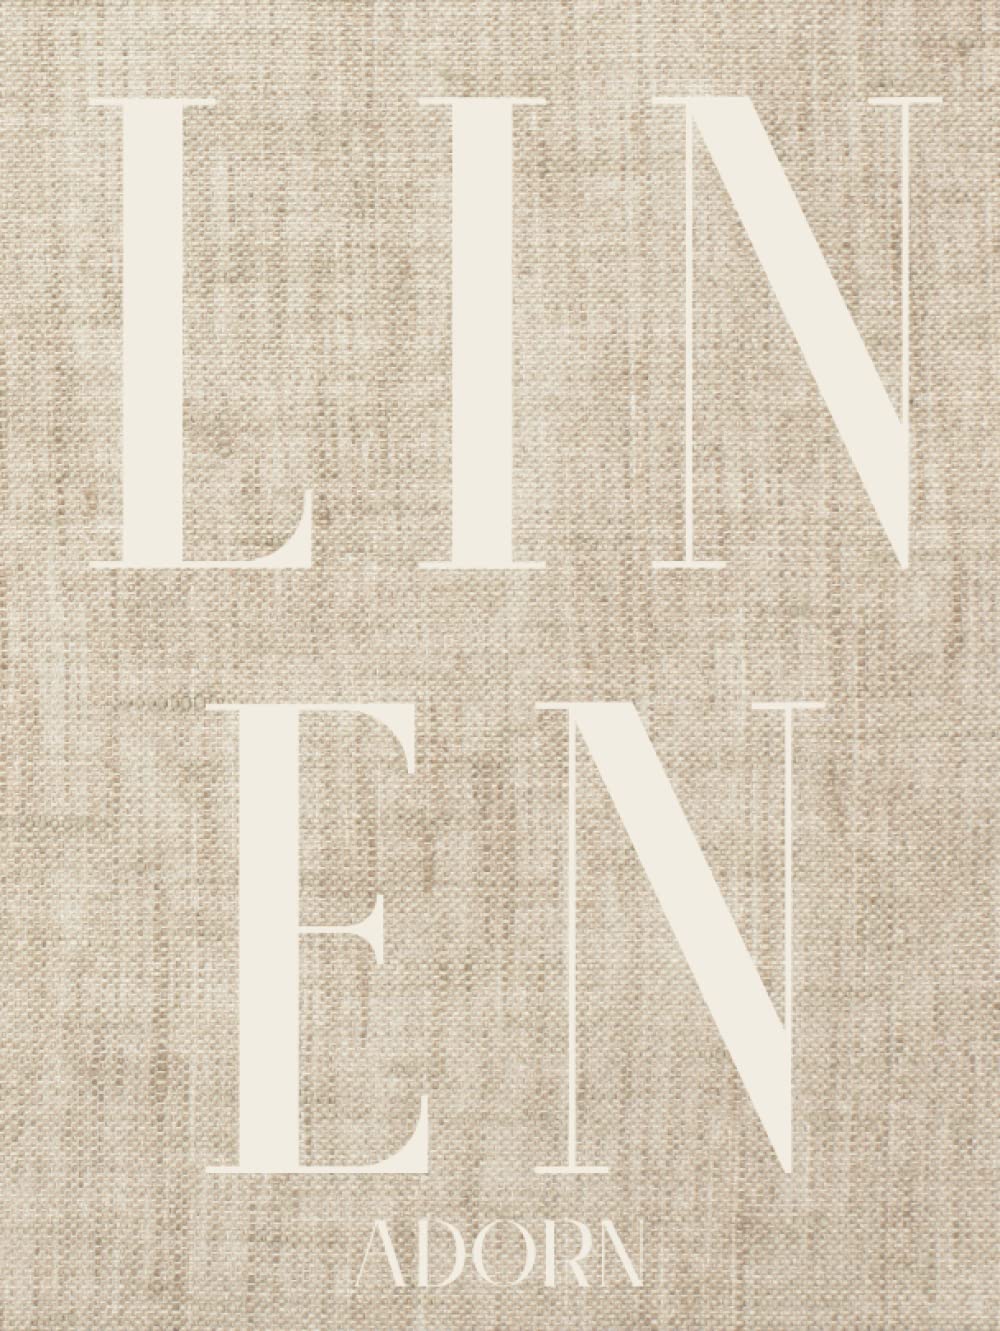 Linen Adorn: Photographed Linen Decor Book For Decorative Display | Thick Spine For Visual Statement Piece